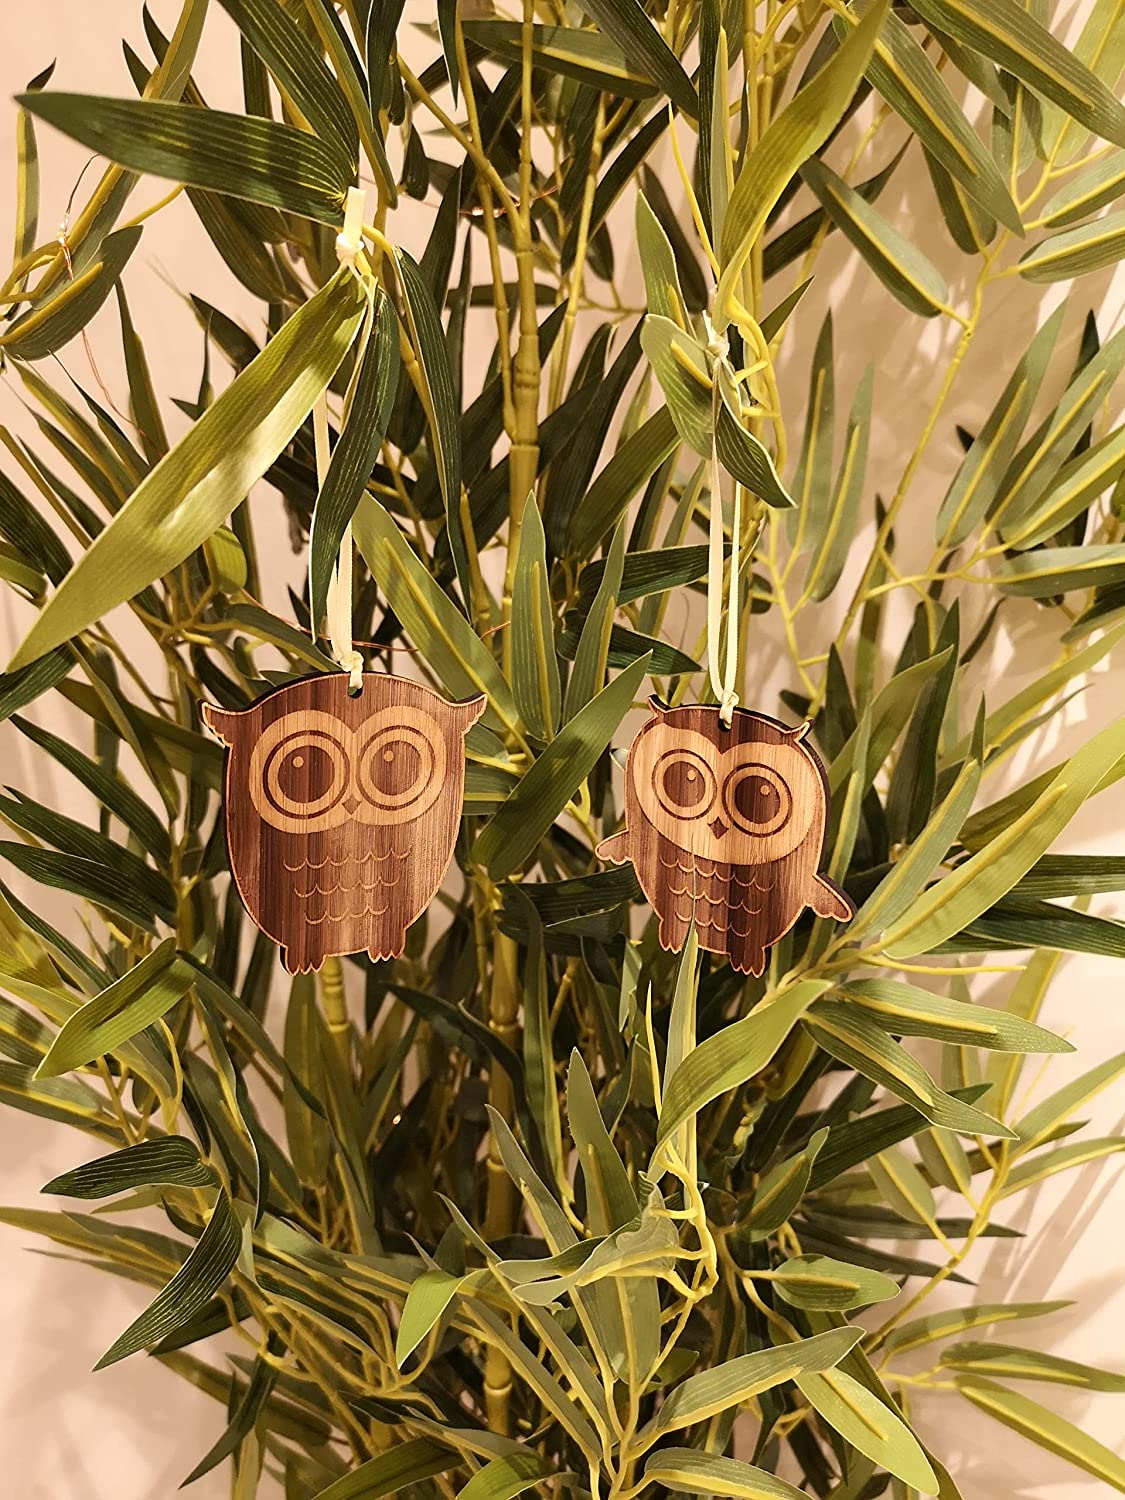 Pair of Cute Owl Bamboo Hanging Decoration Ornaments